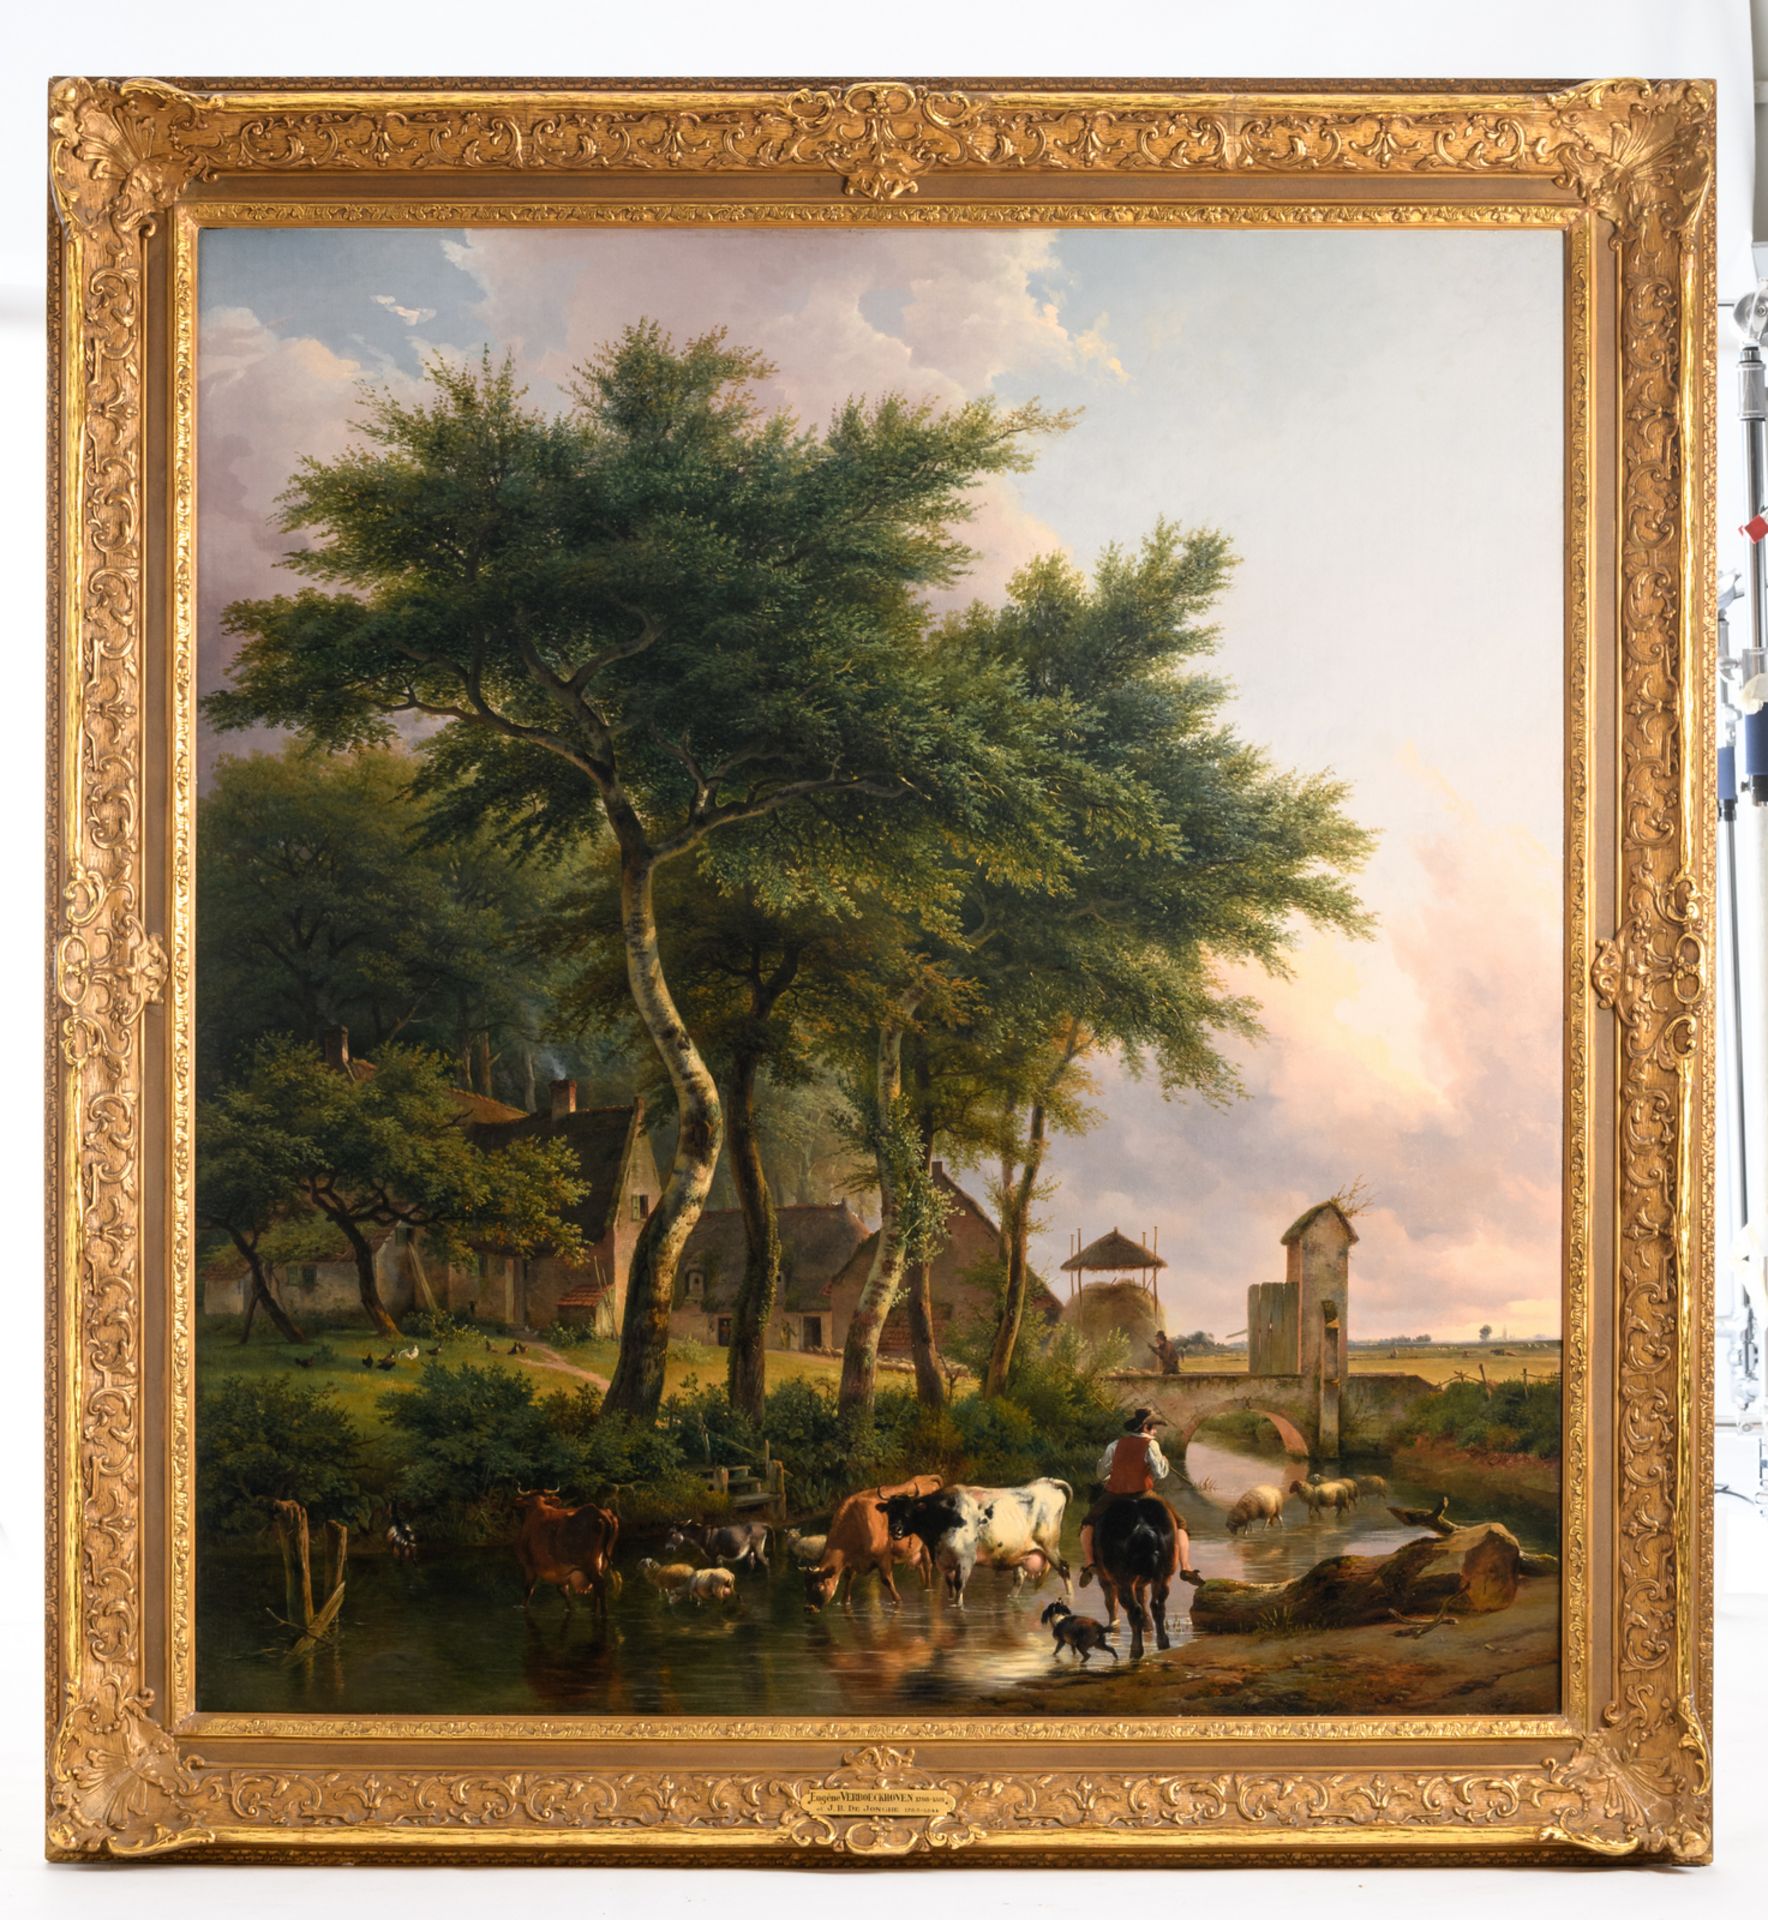 Verboeckhoven E. and De Jonghe J.B., the return of the cattle, oil on canvas, dated 1834, 130 x - Image 2 of 6